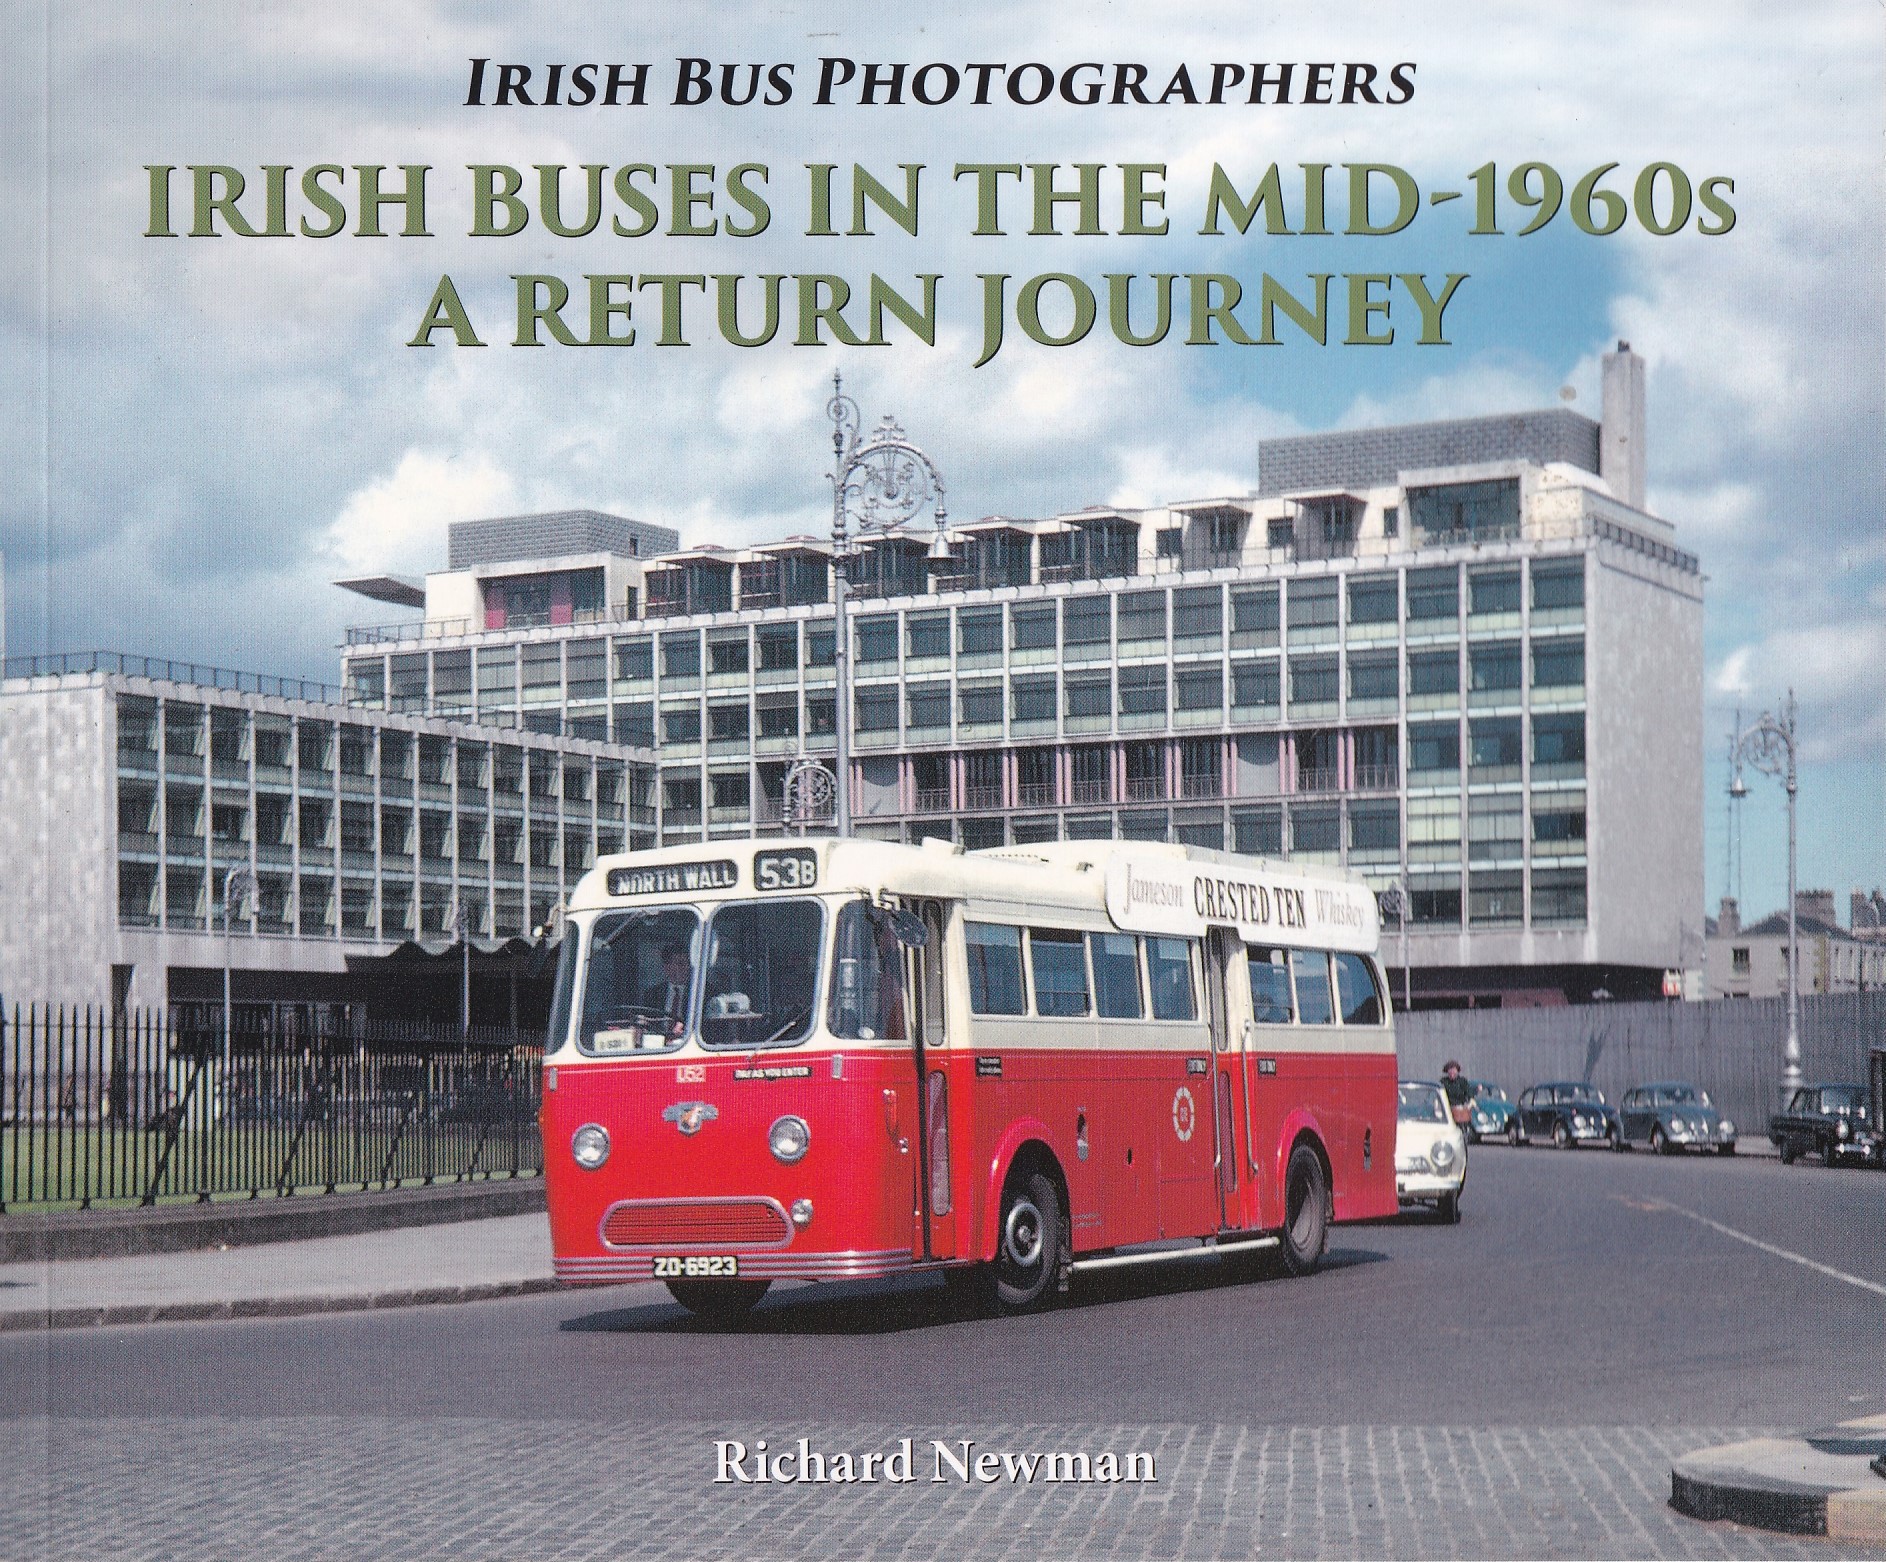 Irish Buses in the mid-1960s: A Return Journey | Richard Newman | Charlie Byrne's